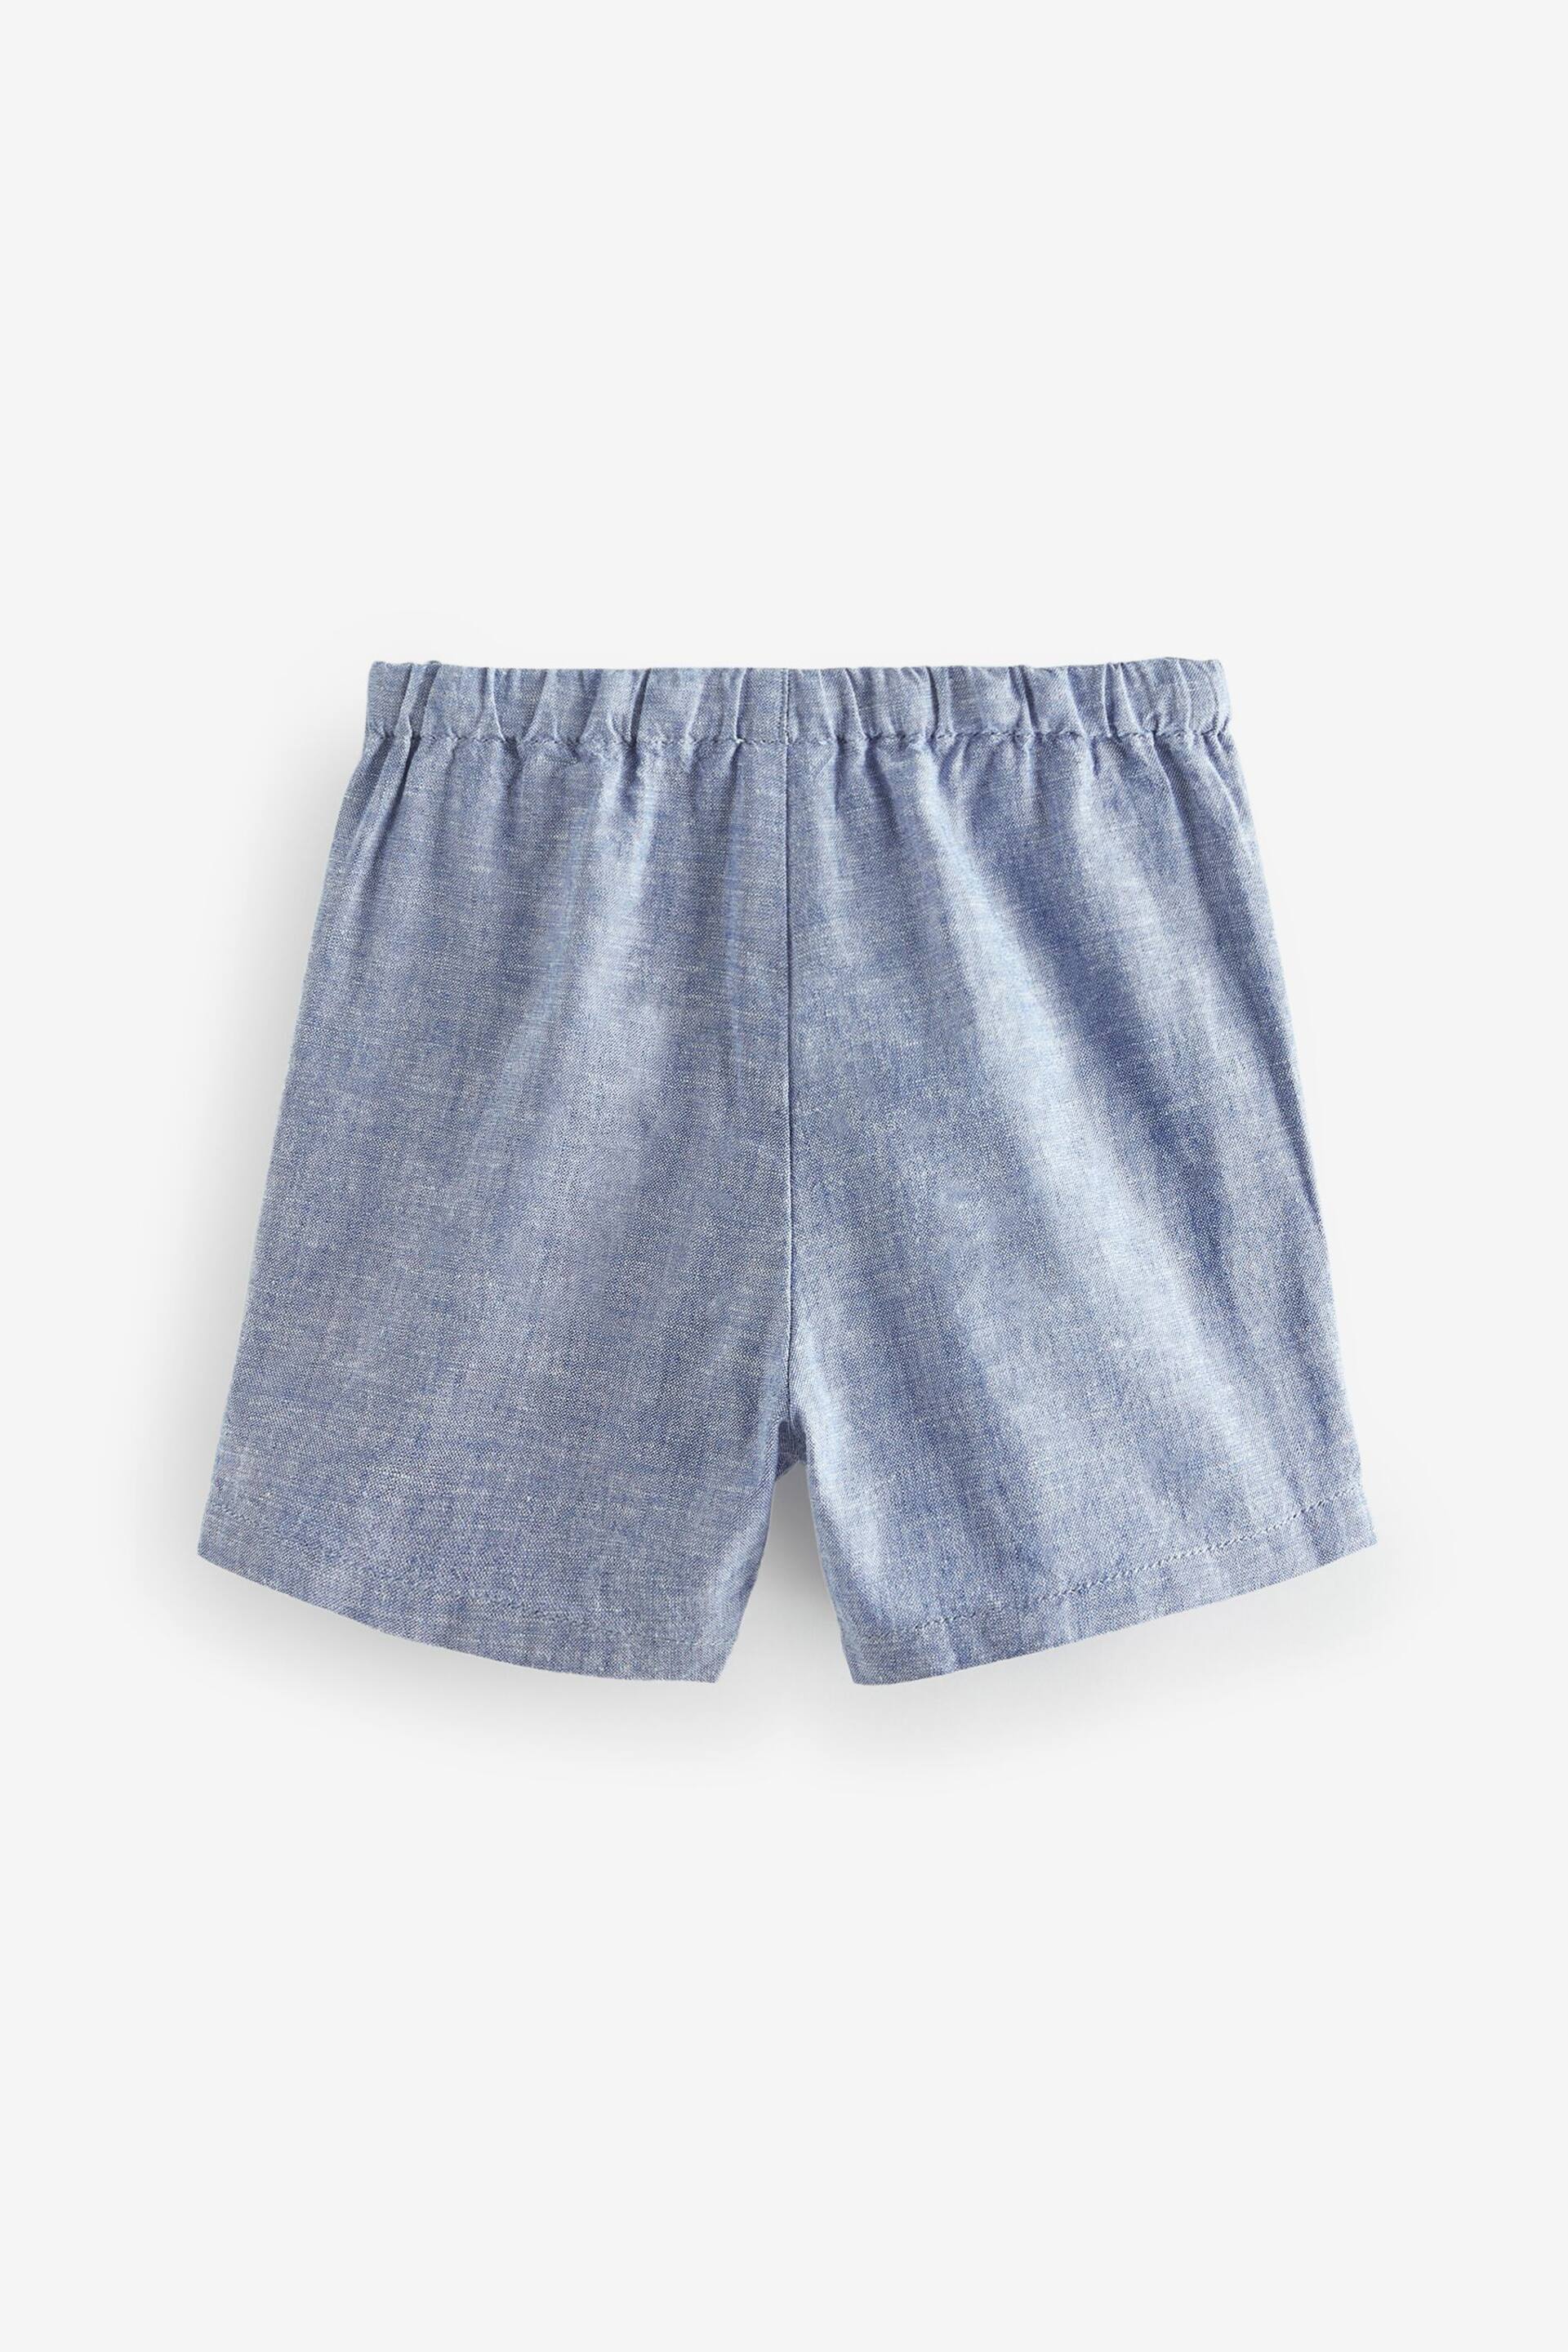 Chambray Blue Linen Blend Pull-On Shorts (3mths-7yrs) - Image 5 of 6